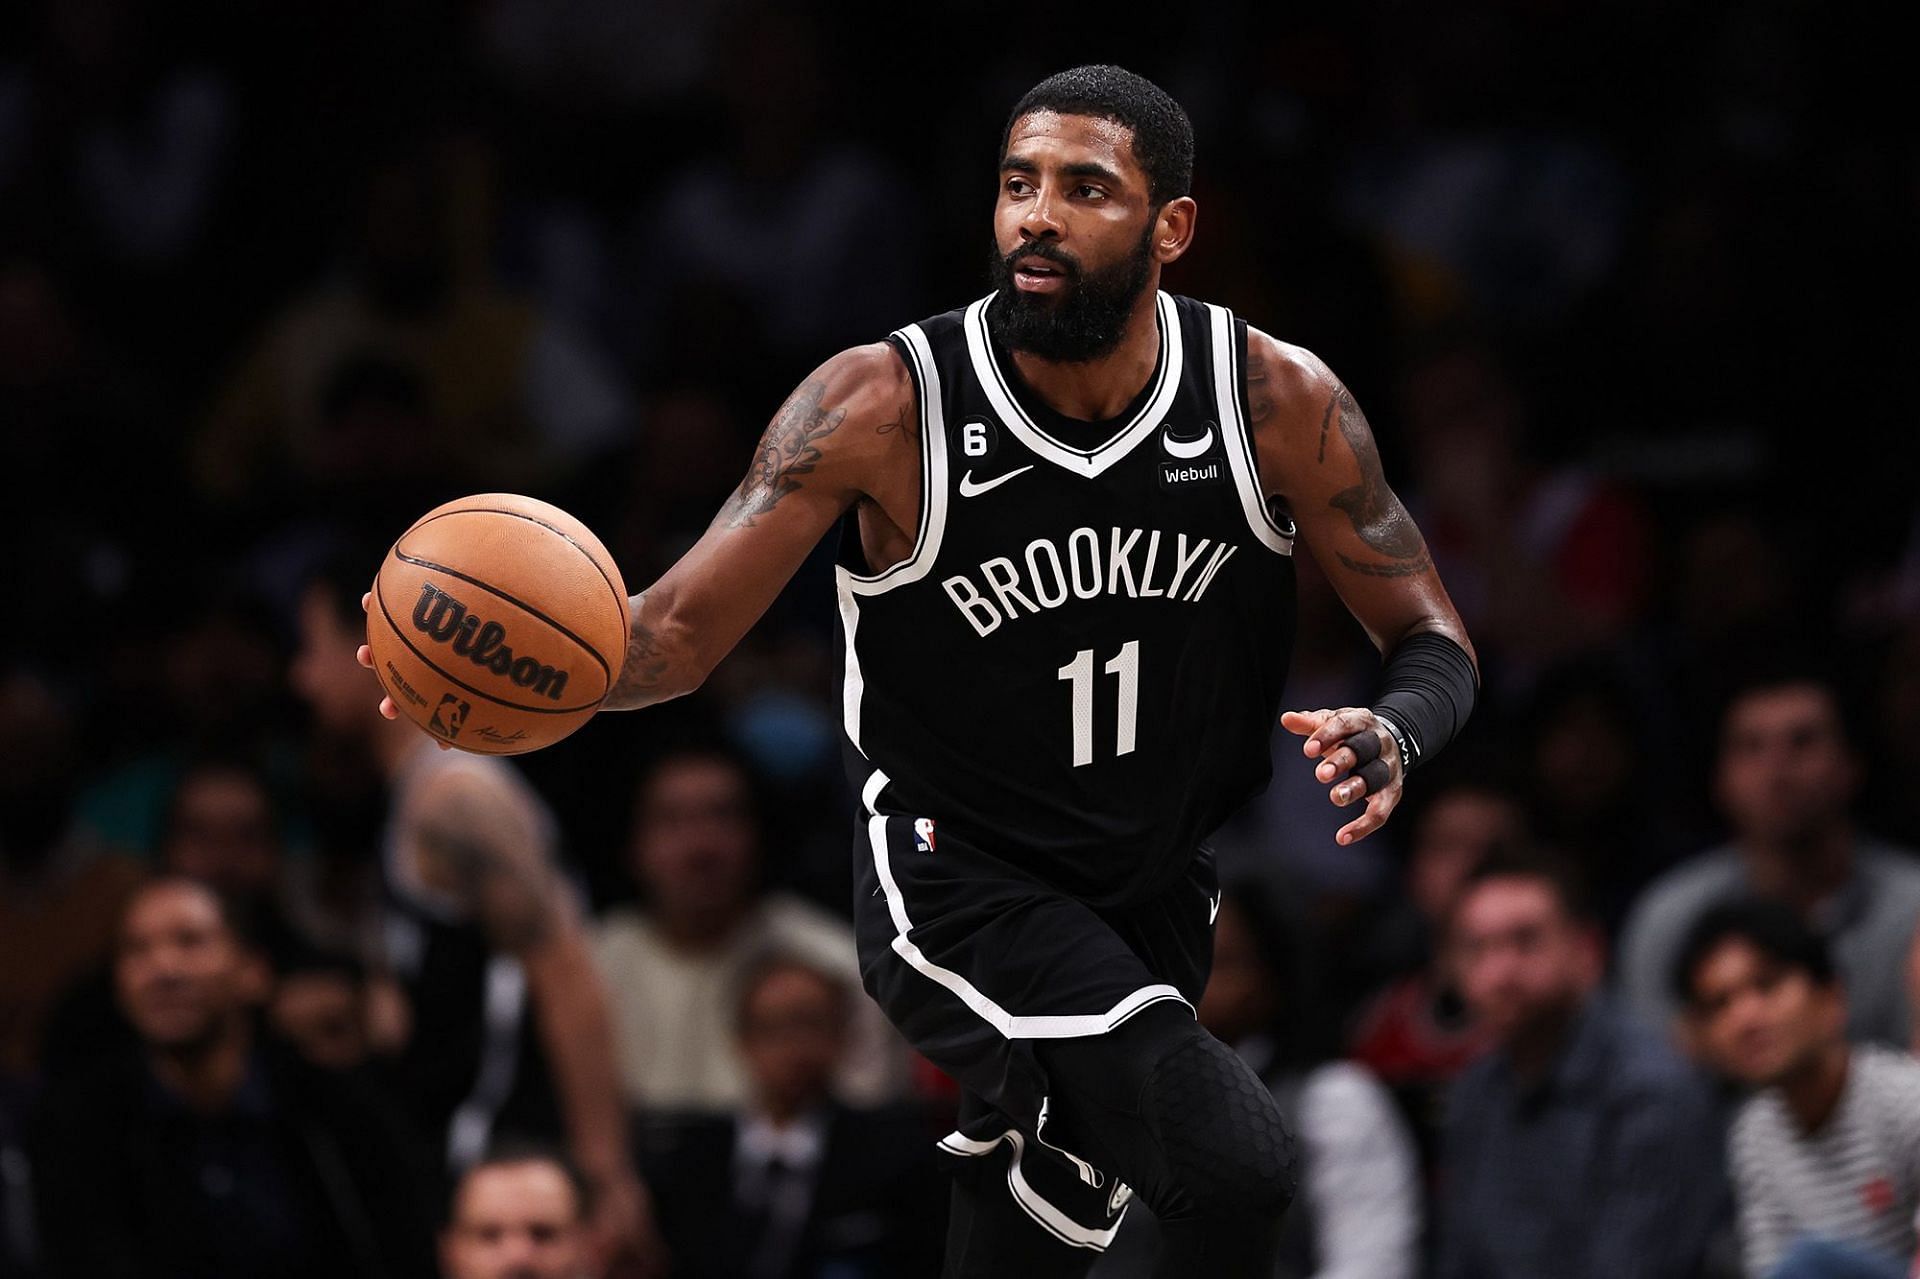 Can Kyrie Irving lead the Brooklyn Nets to victory over the Toronto Raptors?